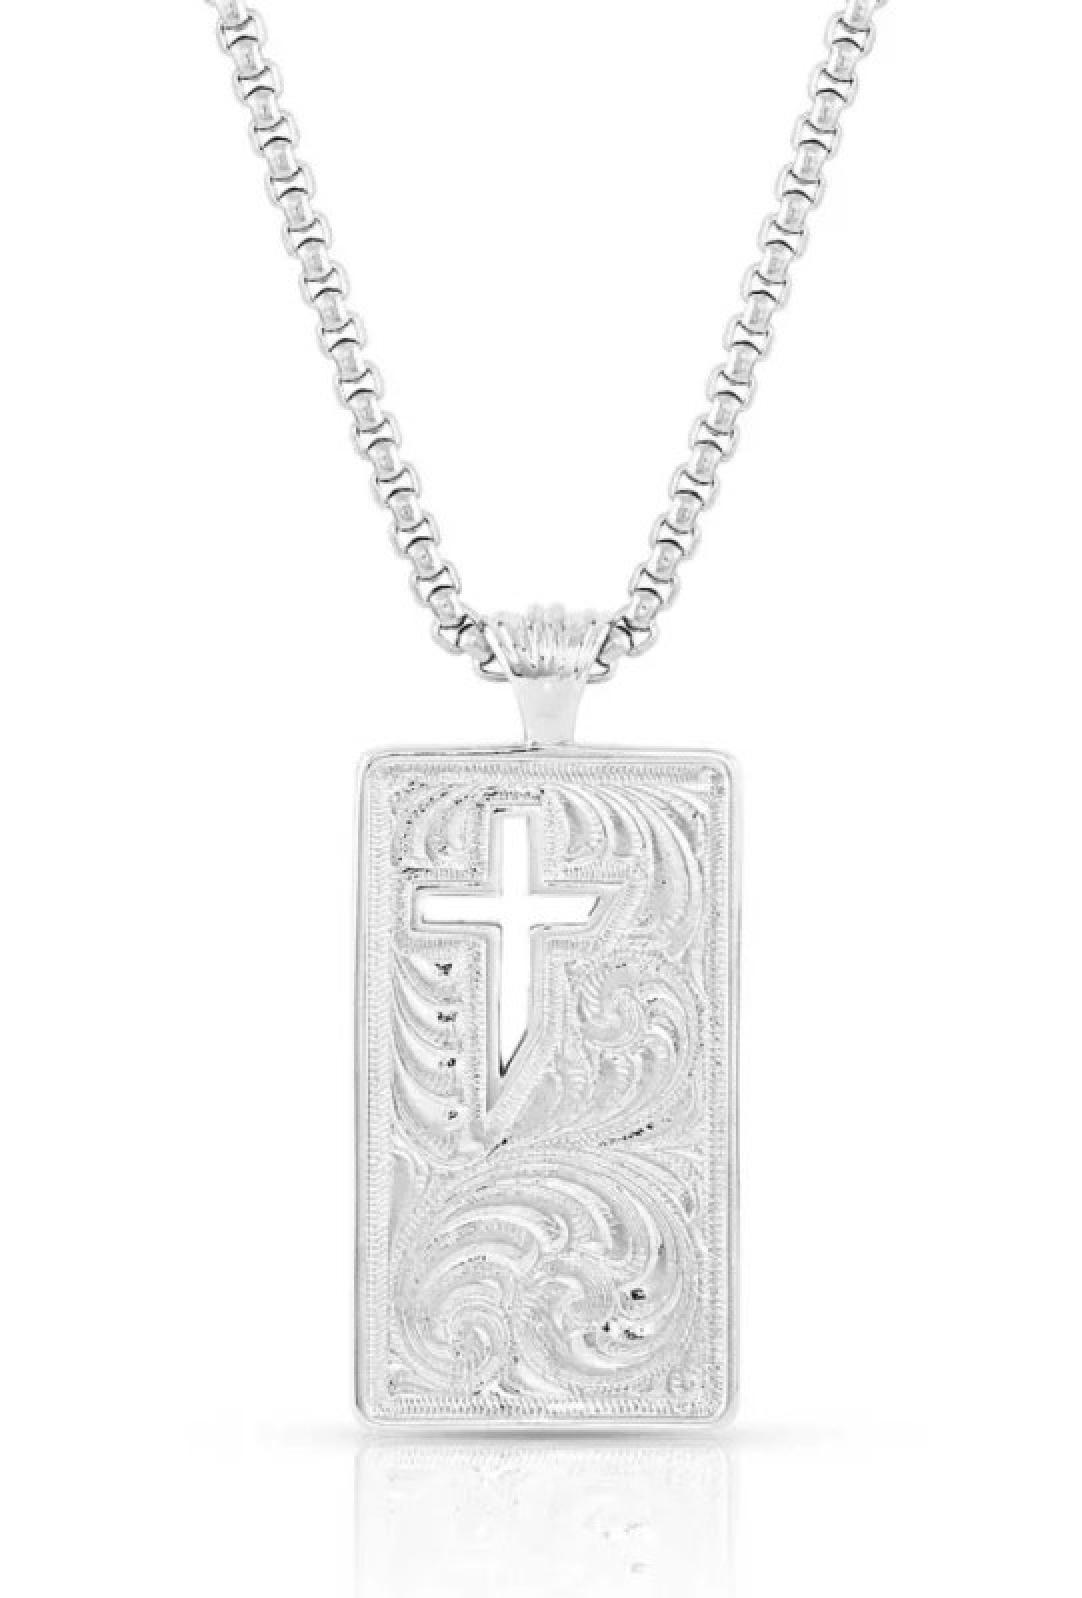 Montana Silversmiths American Legends Cross Pendent Necklace Back